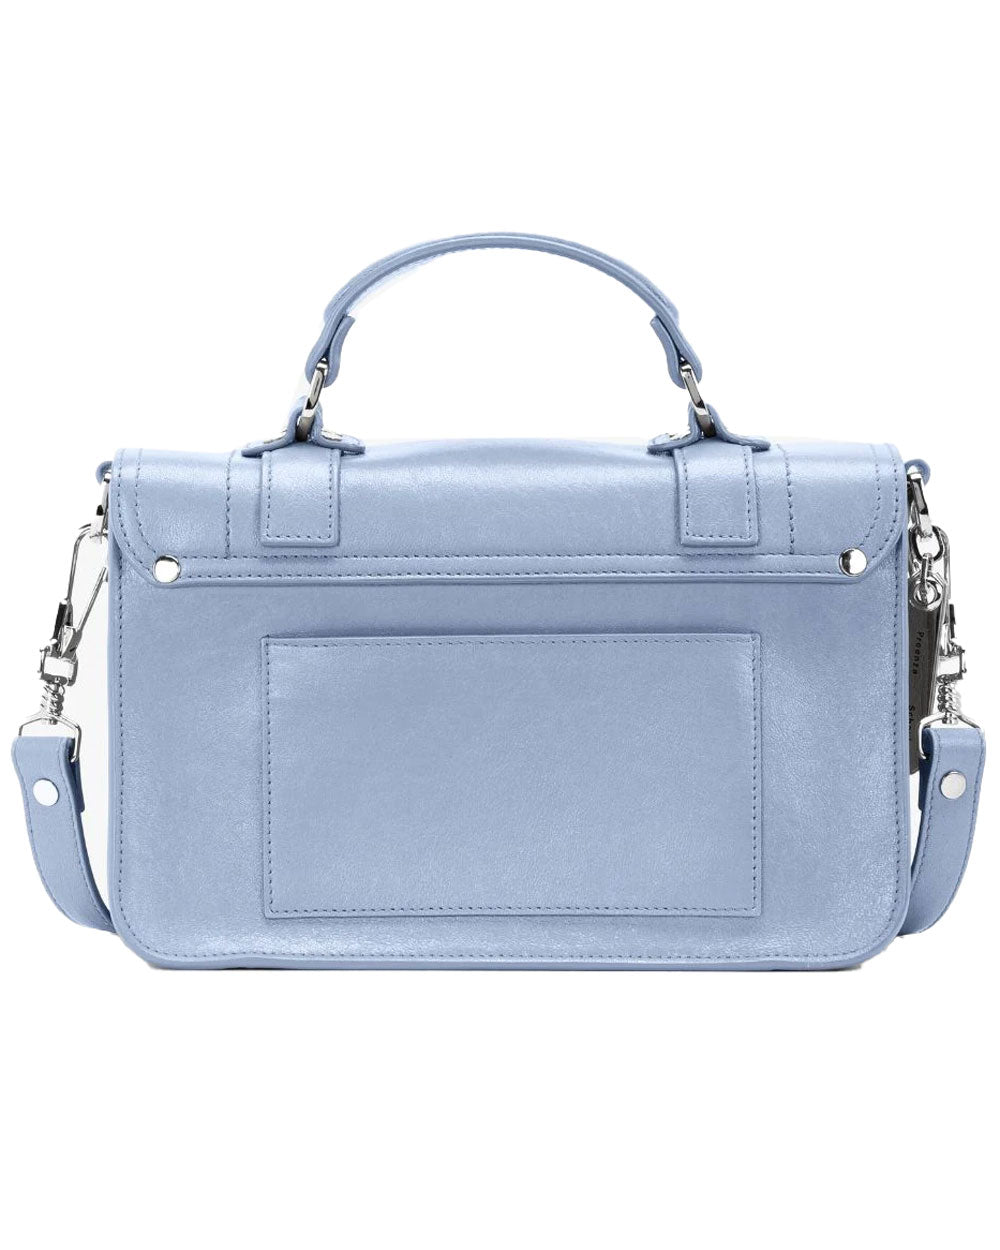 PS1 Tiny Bag in Light Blue